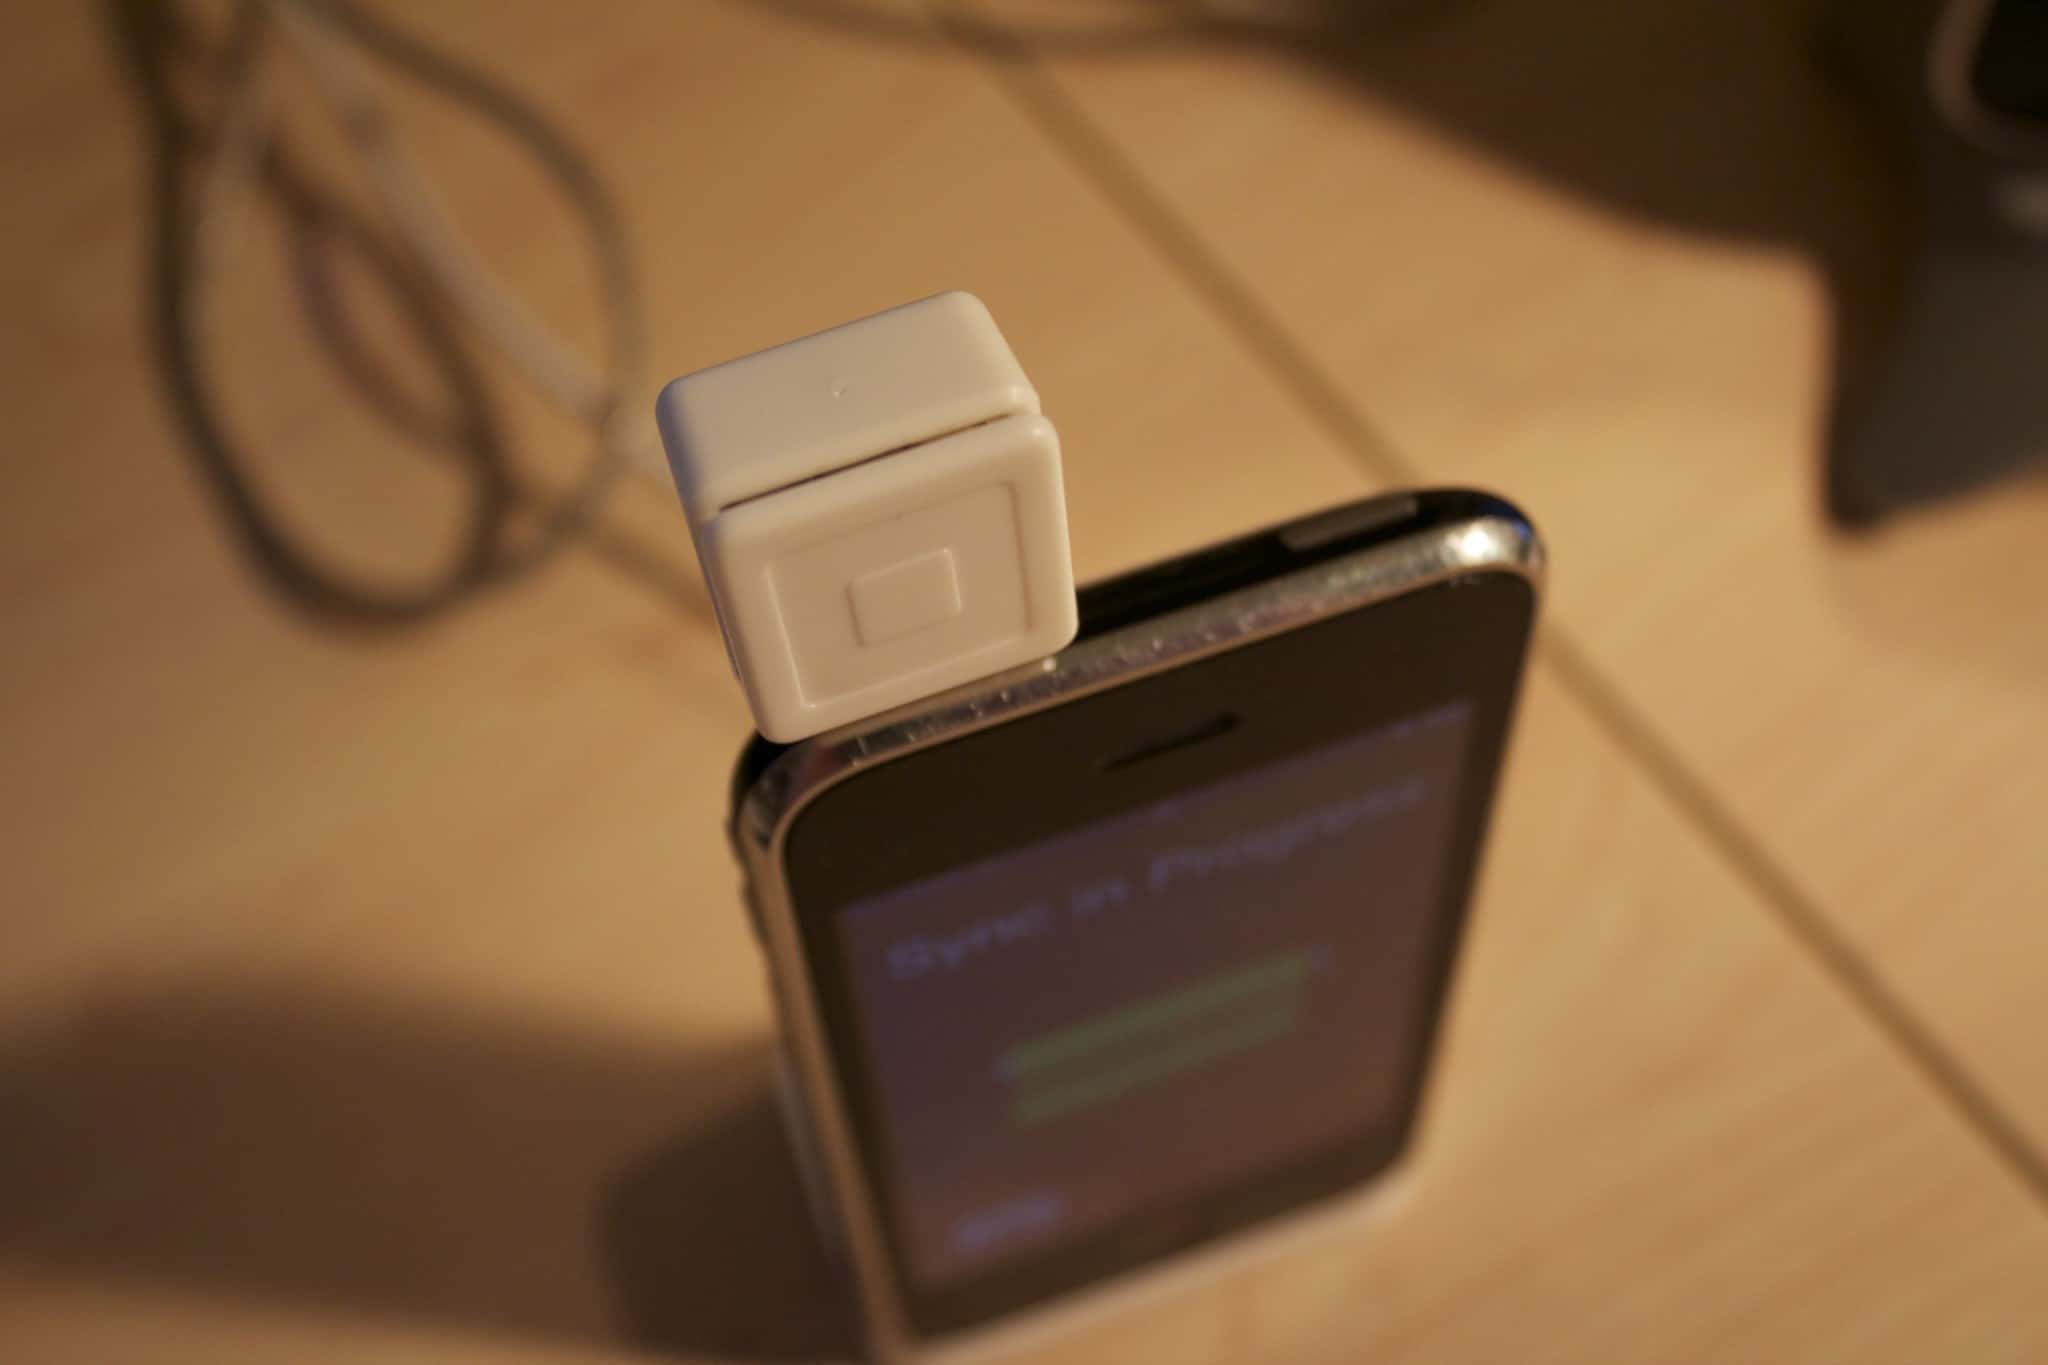 Square Reader + iPhone 3G by Chris Harrison